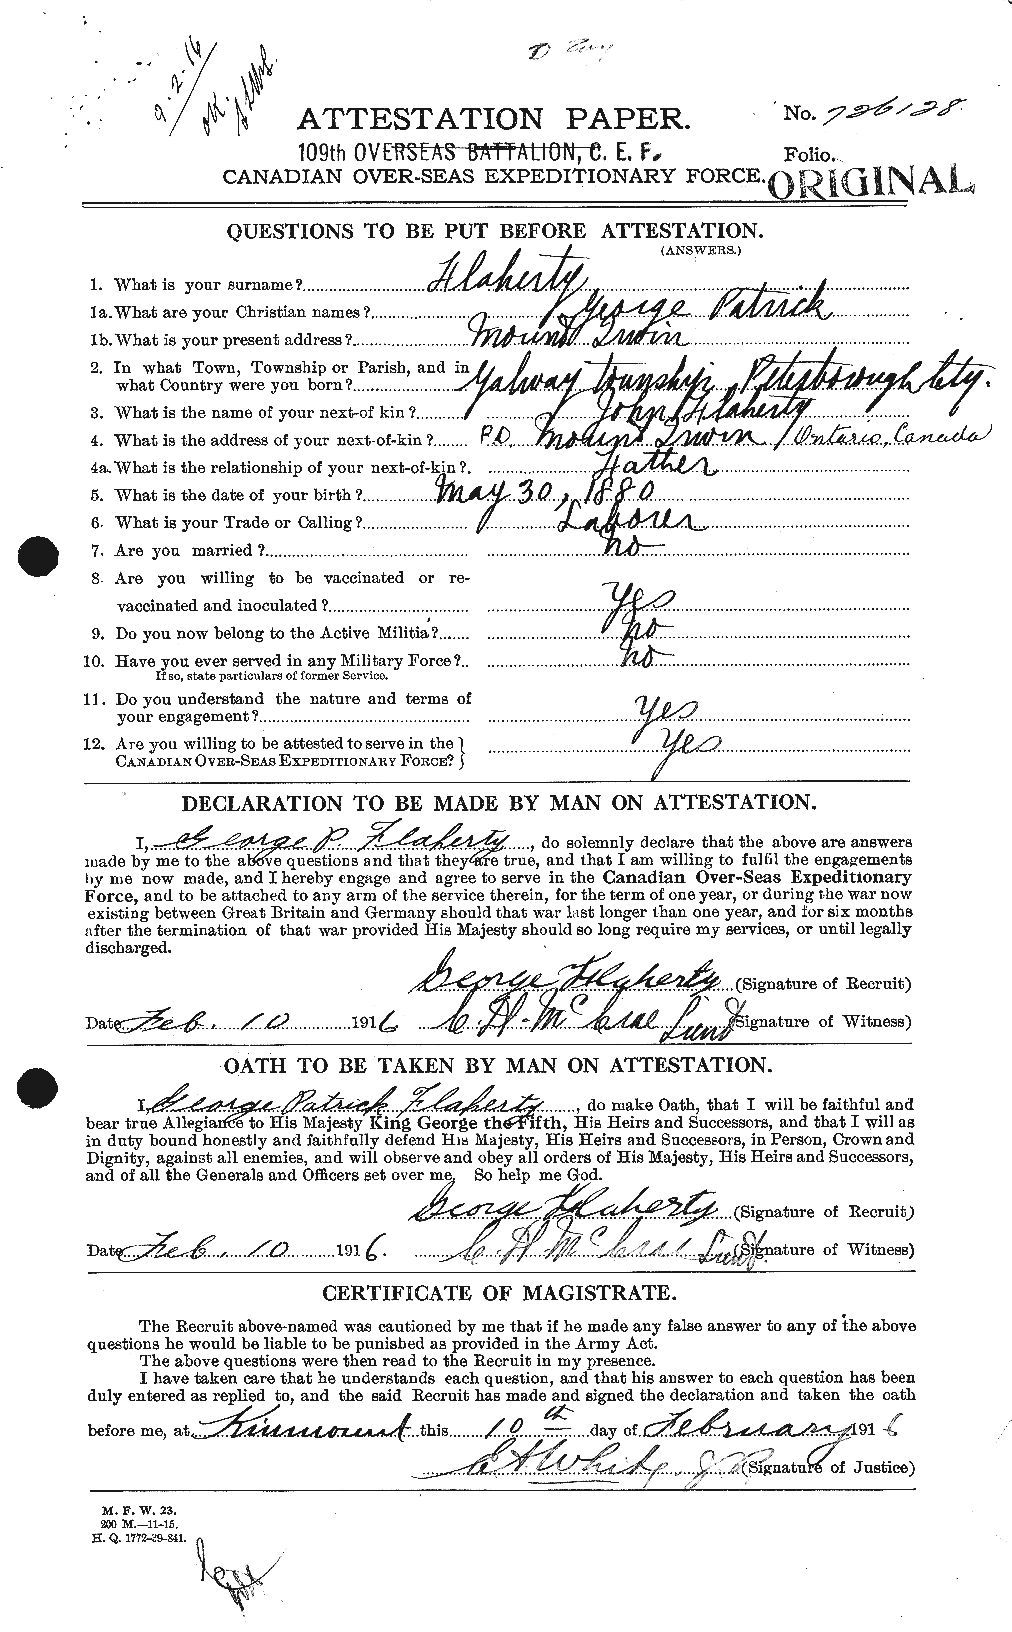 Personnel Records of the First World War - CEF 323358a